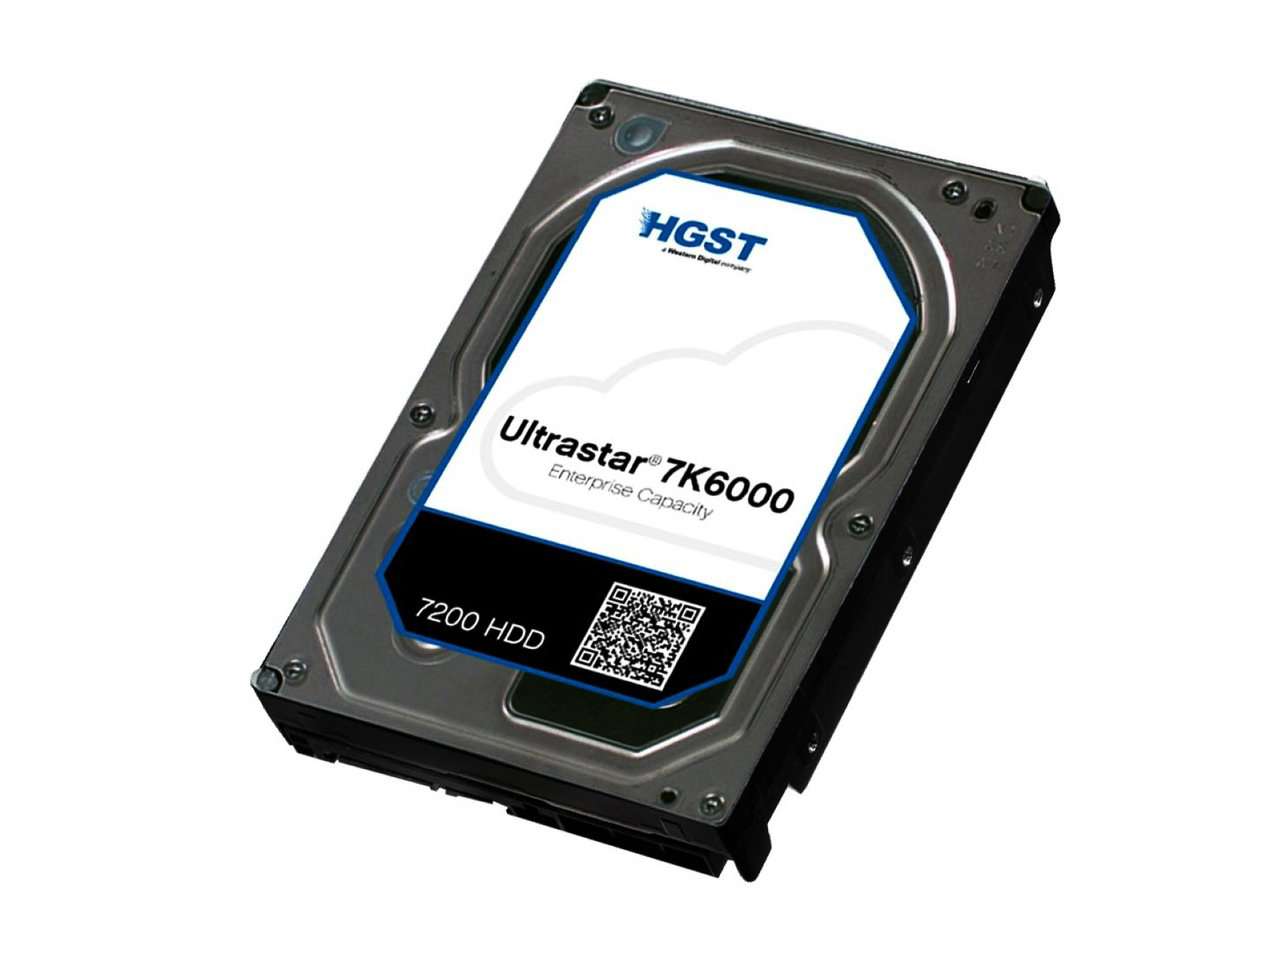 HGST Ultrastar 7K6000 0F22943  HUS726020ALS210 2TB 7.2K RPM SAS 12Gb/s 512n 128MB Cache 3.5" ISE Manufacturer Recertified HDD